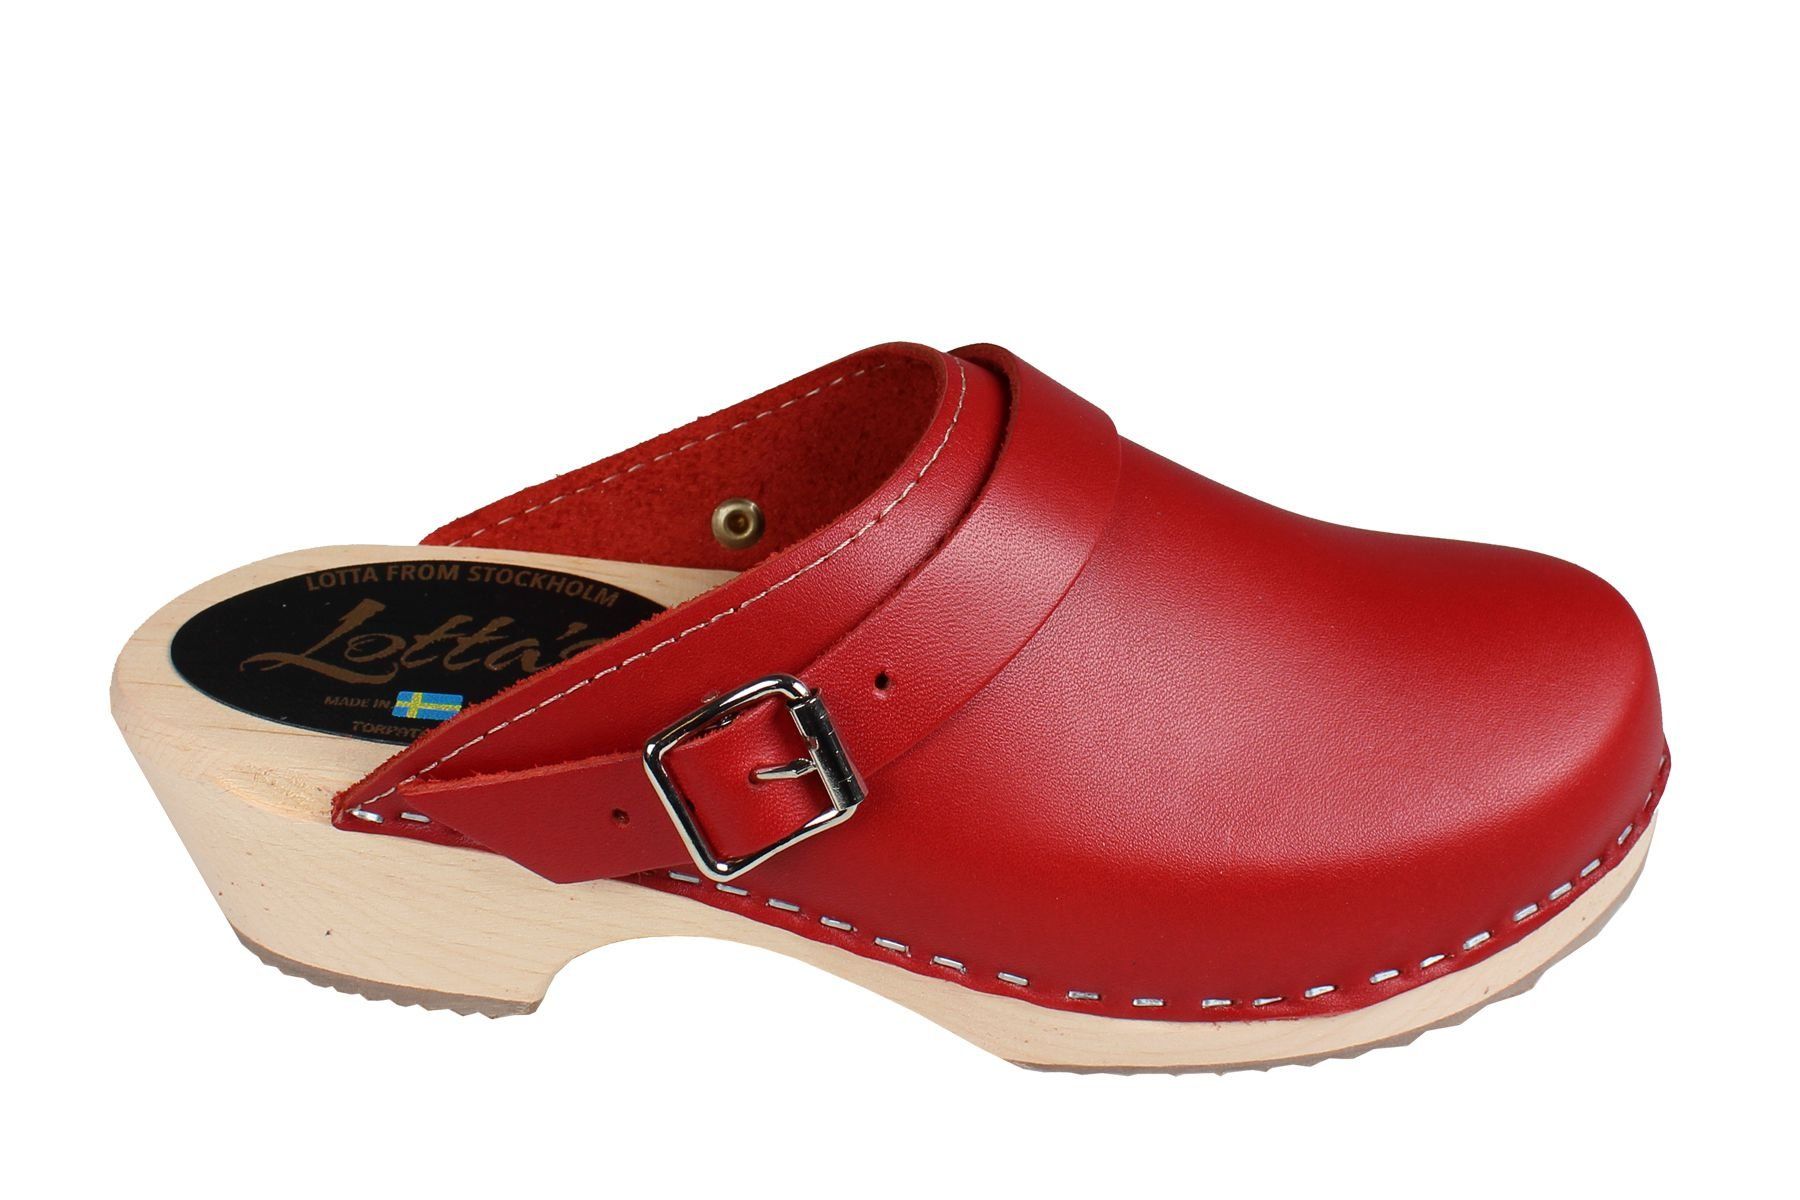 Classic red clogs with strap